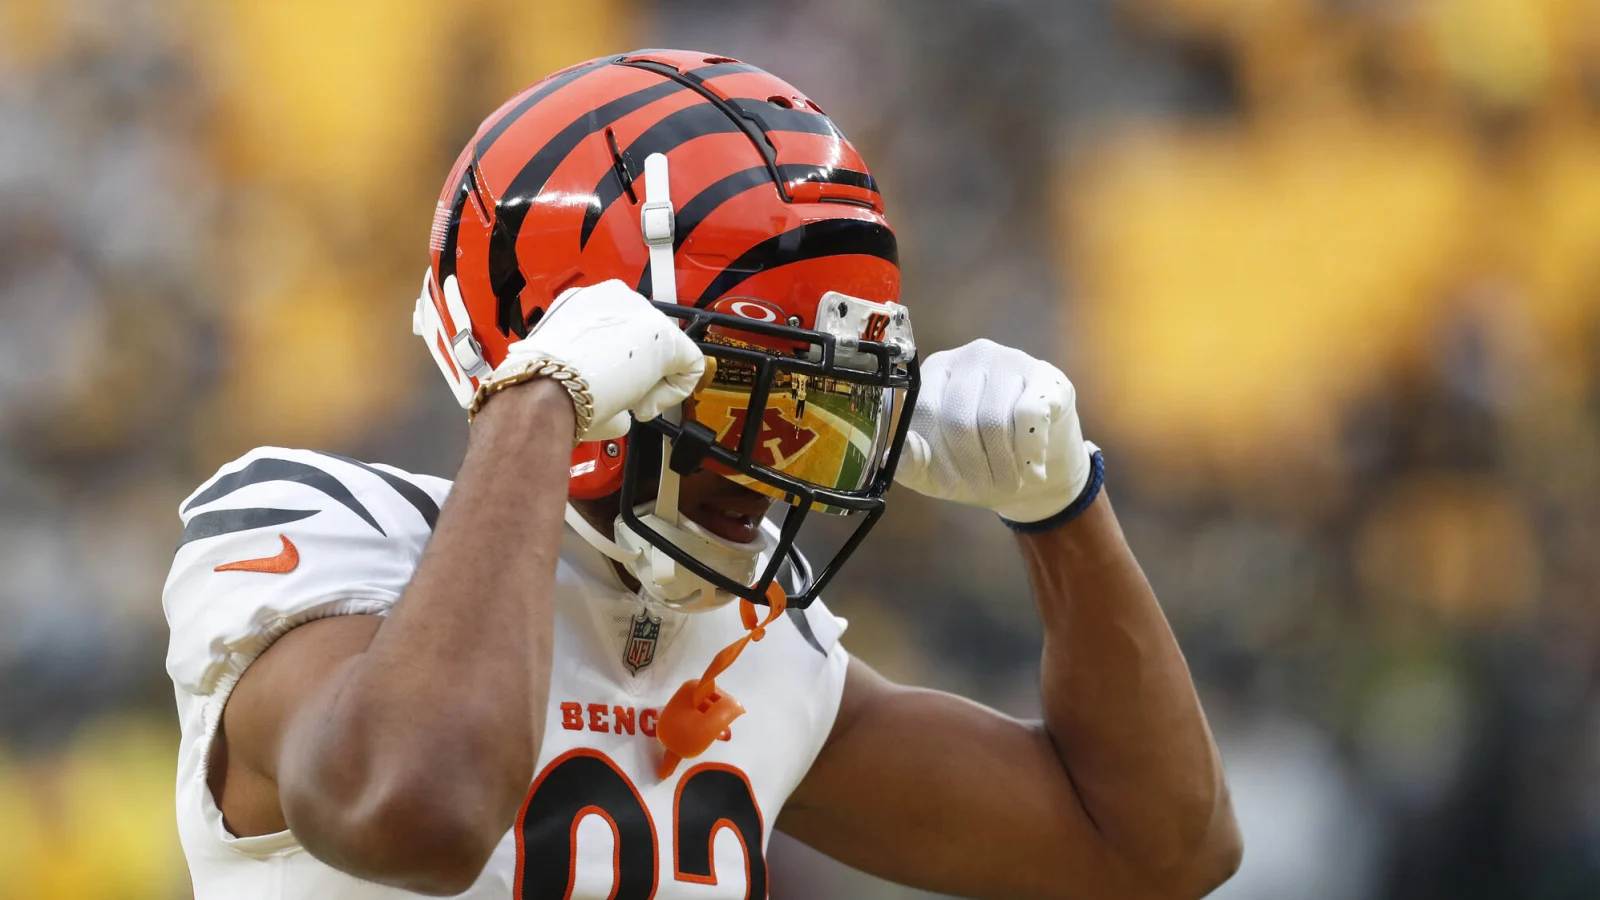 NFL News: Detroit Lions Eyeing Former 1,000-Yard Receiver Tyler Boyd for Enhanced Offensive Lineup